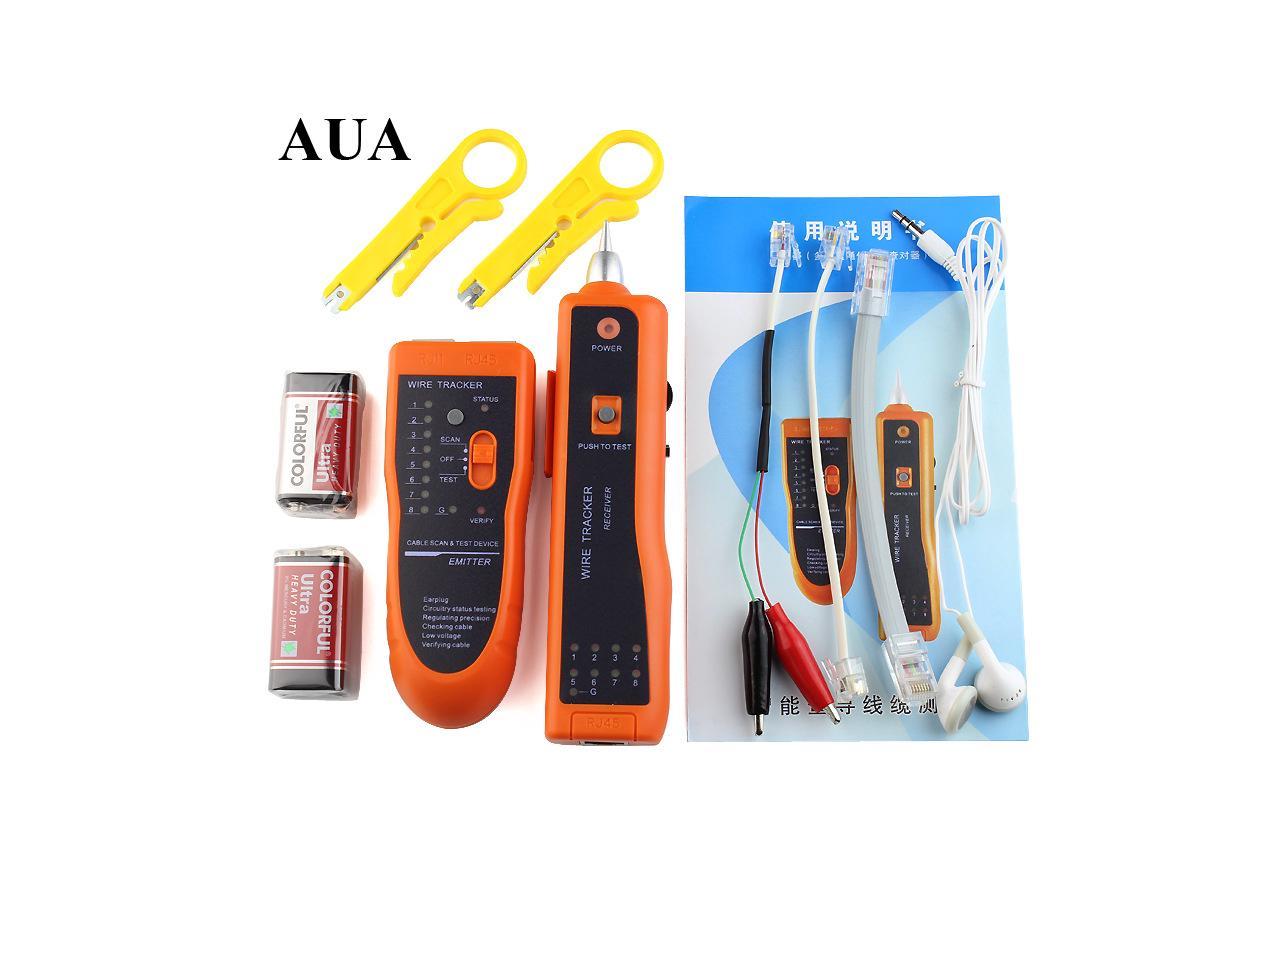 Details about   RJ11/45 Cable Tester Telephone Wire Network Tone Generator Probe Tracker Tracer 